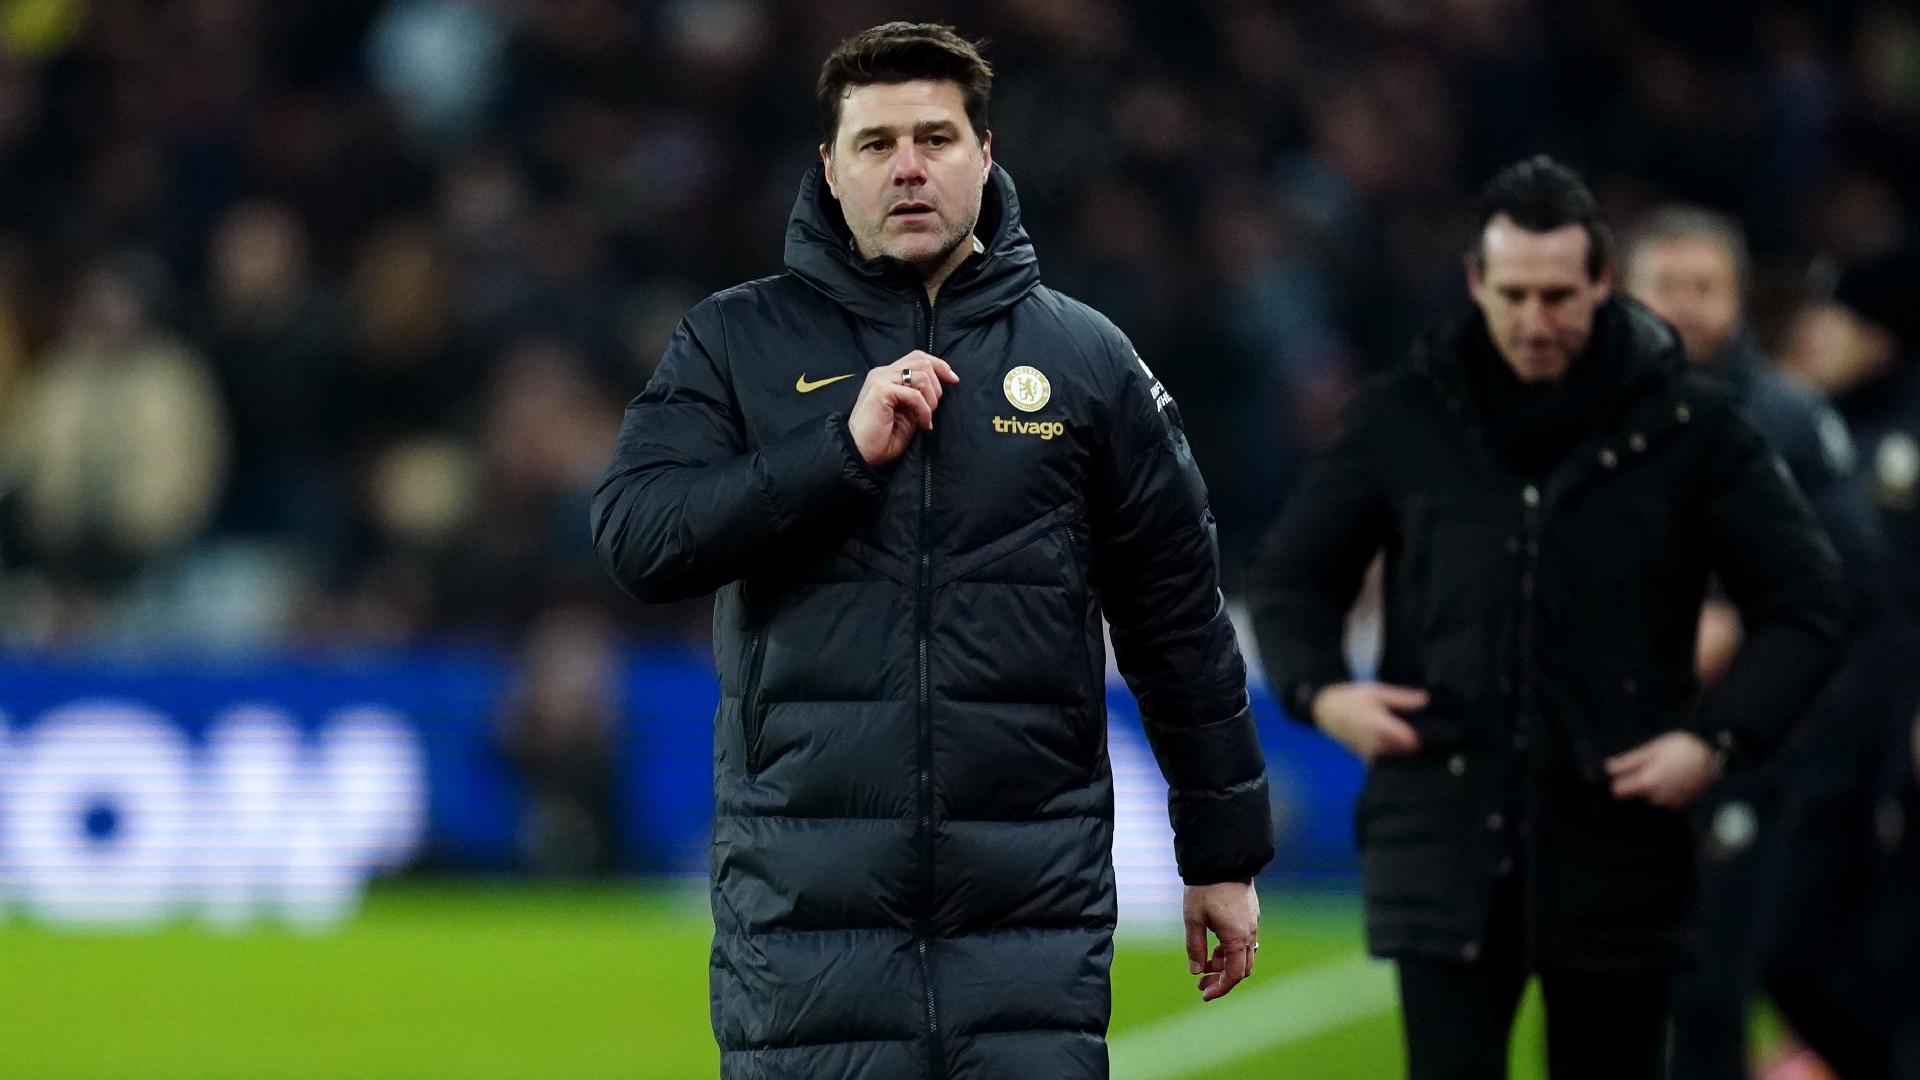 Mauricio Pochettino tells fans his side are ‘not the Chelsea from 20 years ago’